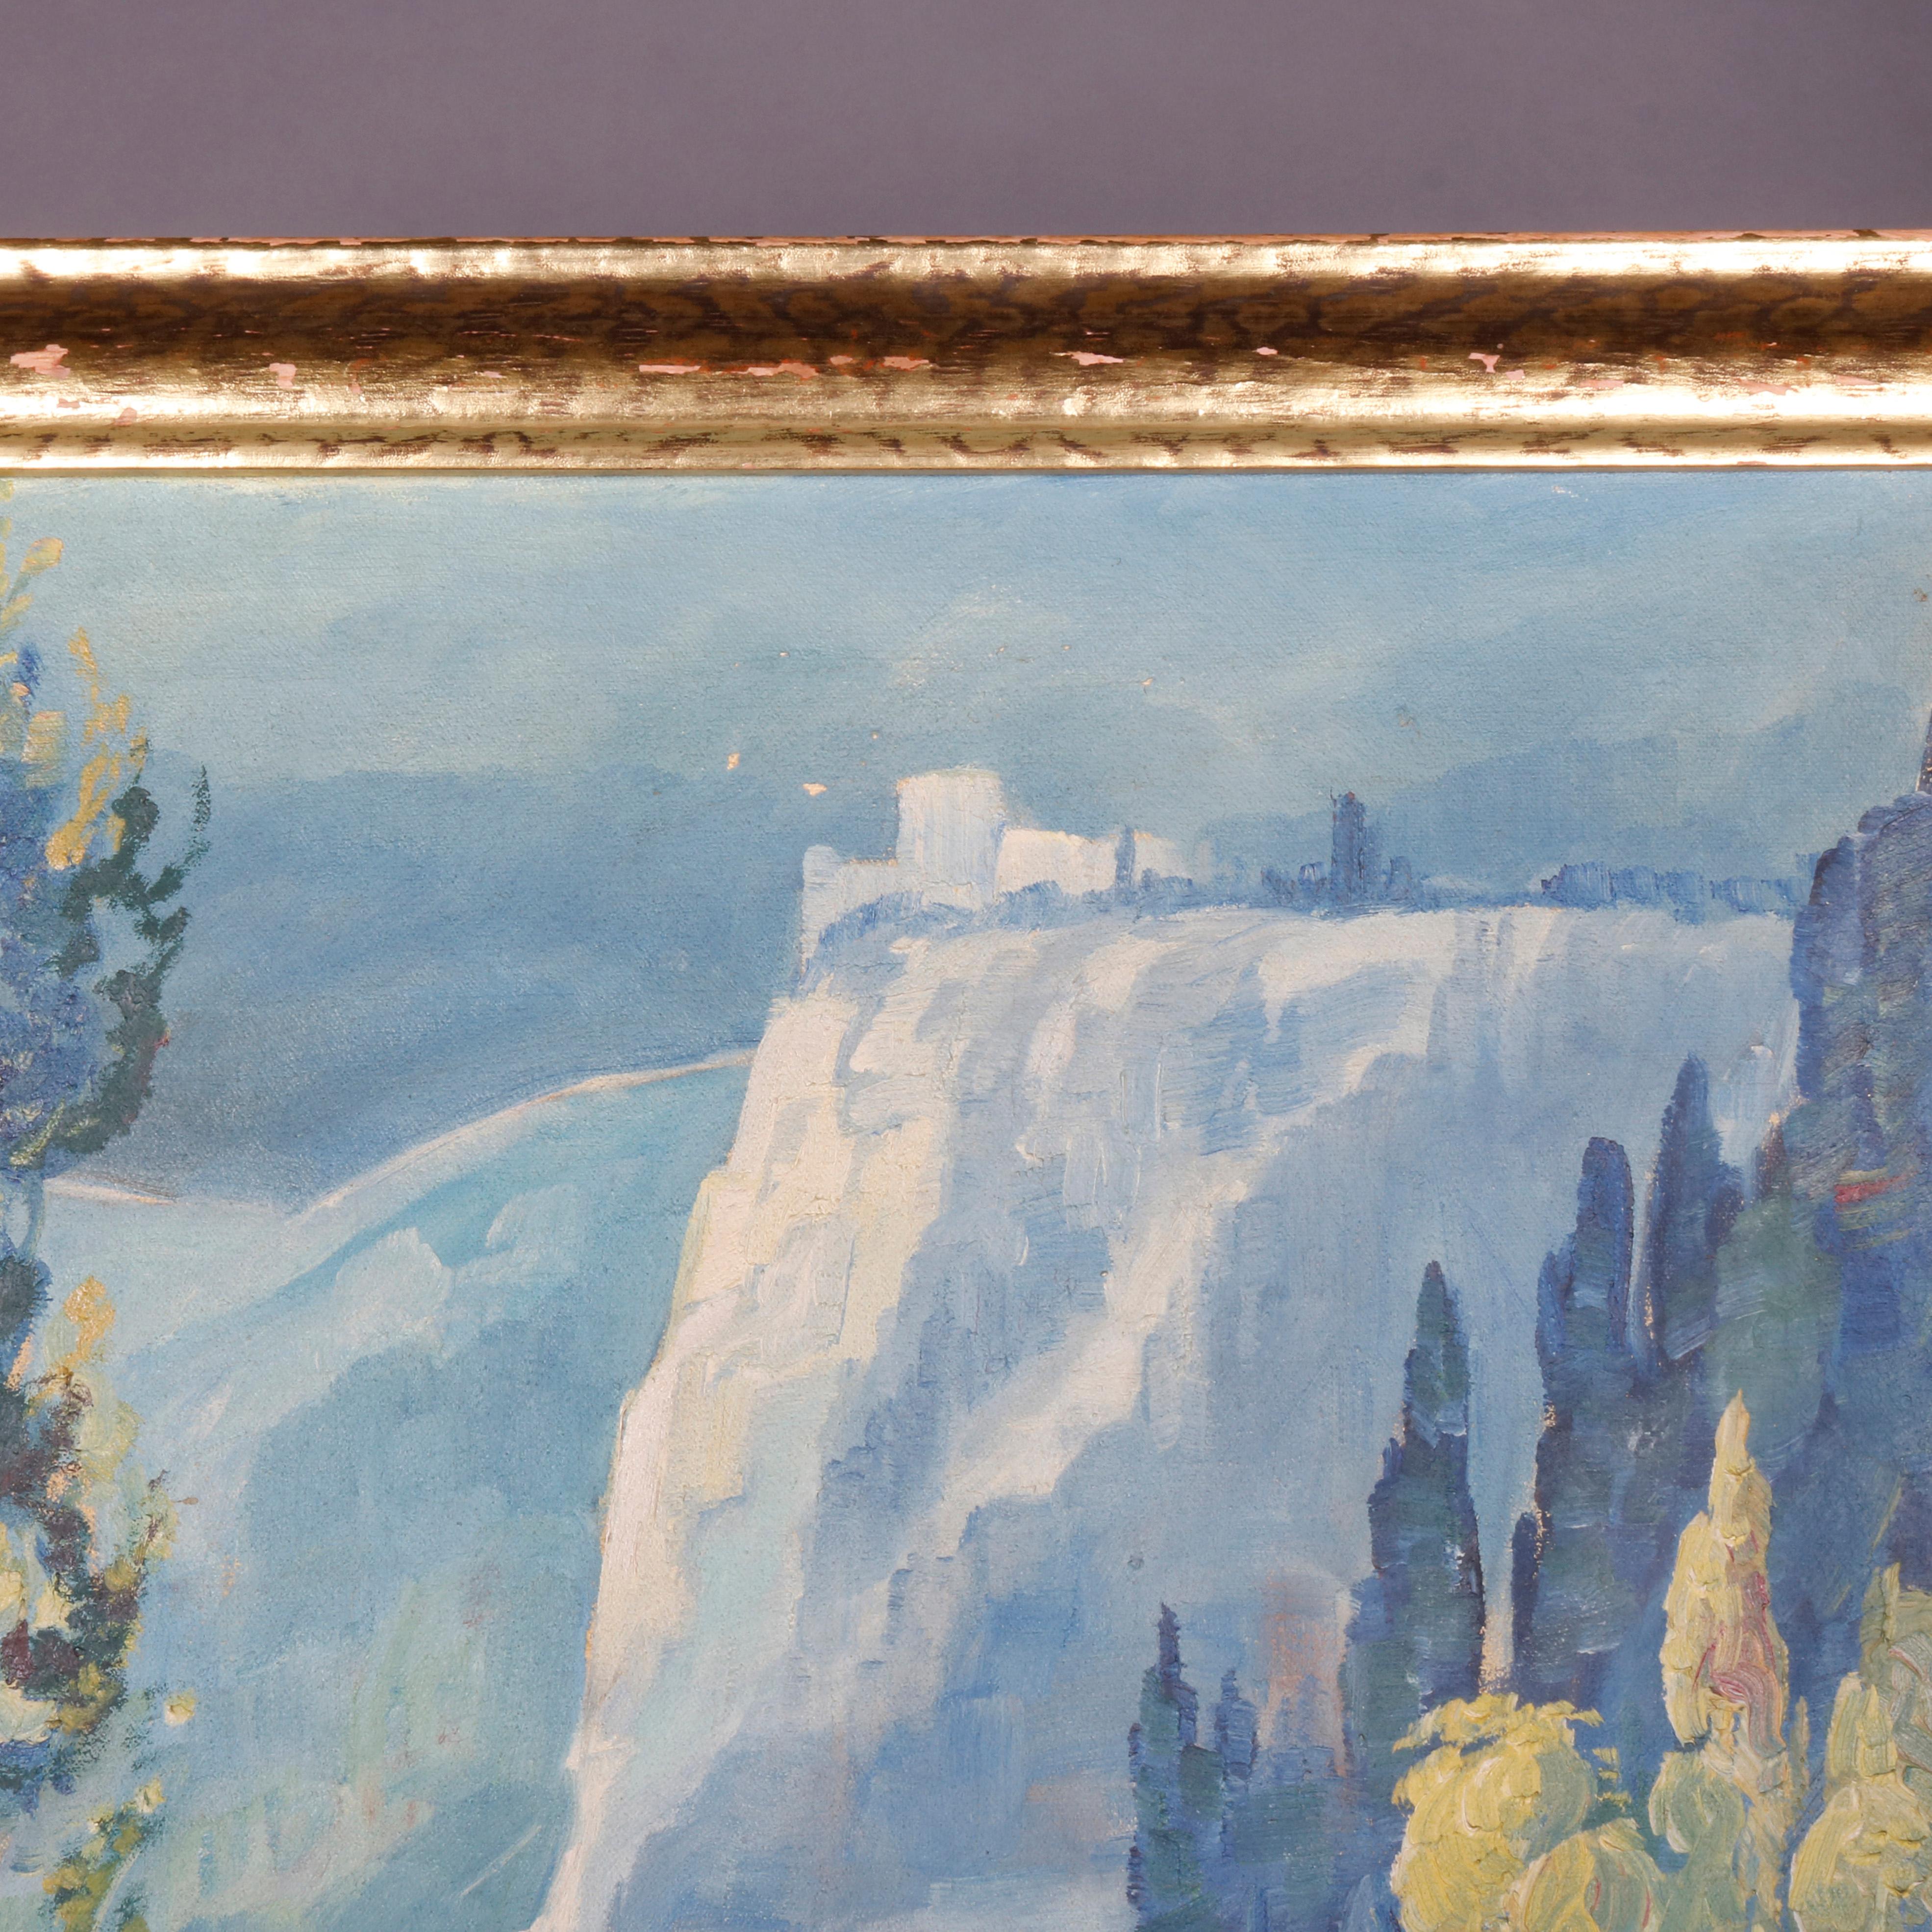 Arts and Crafts Antique Arts & Crafts Impressionist Oil on Canvas Landscape Painting, circa 1930